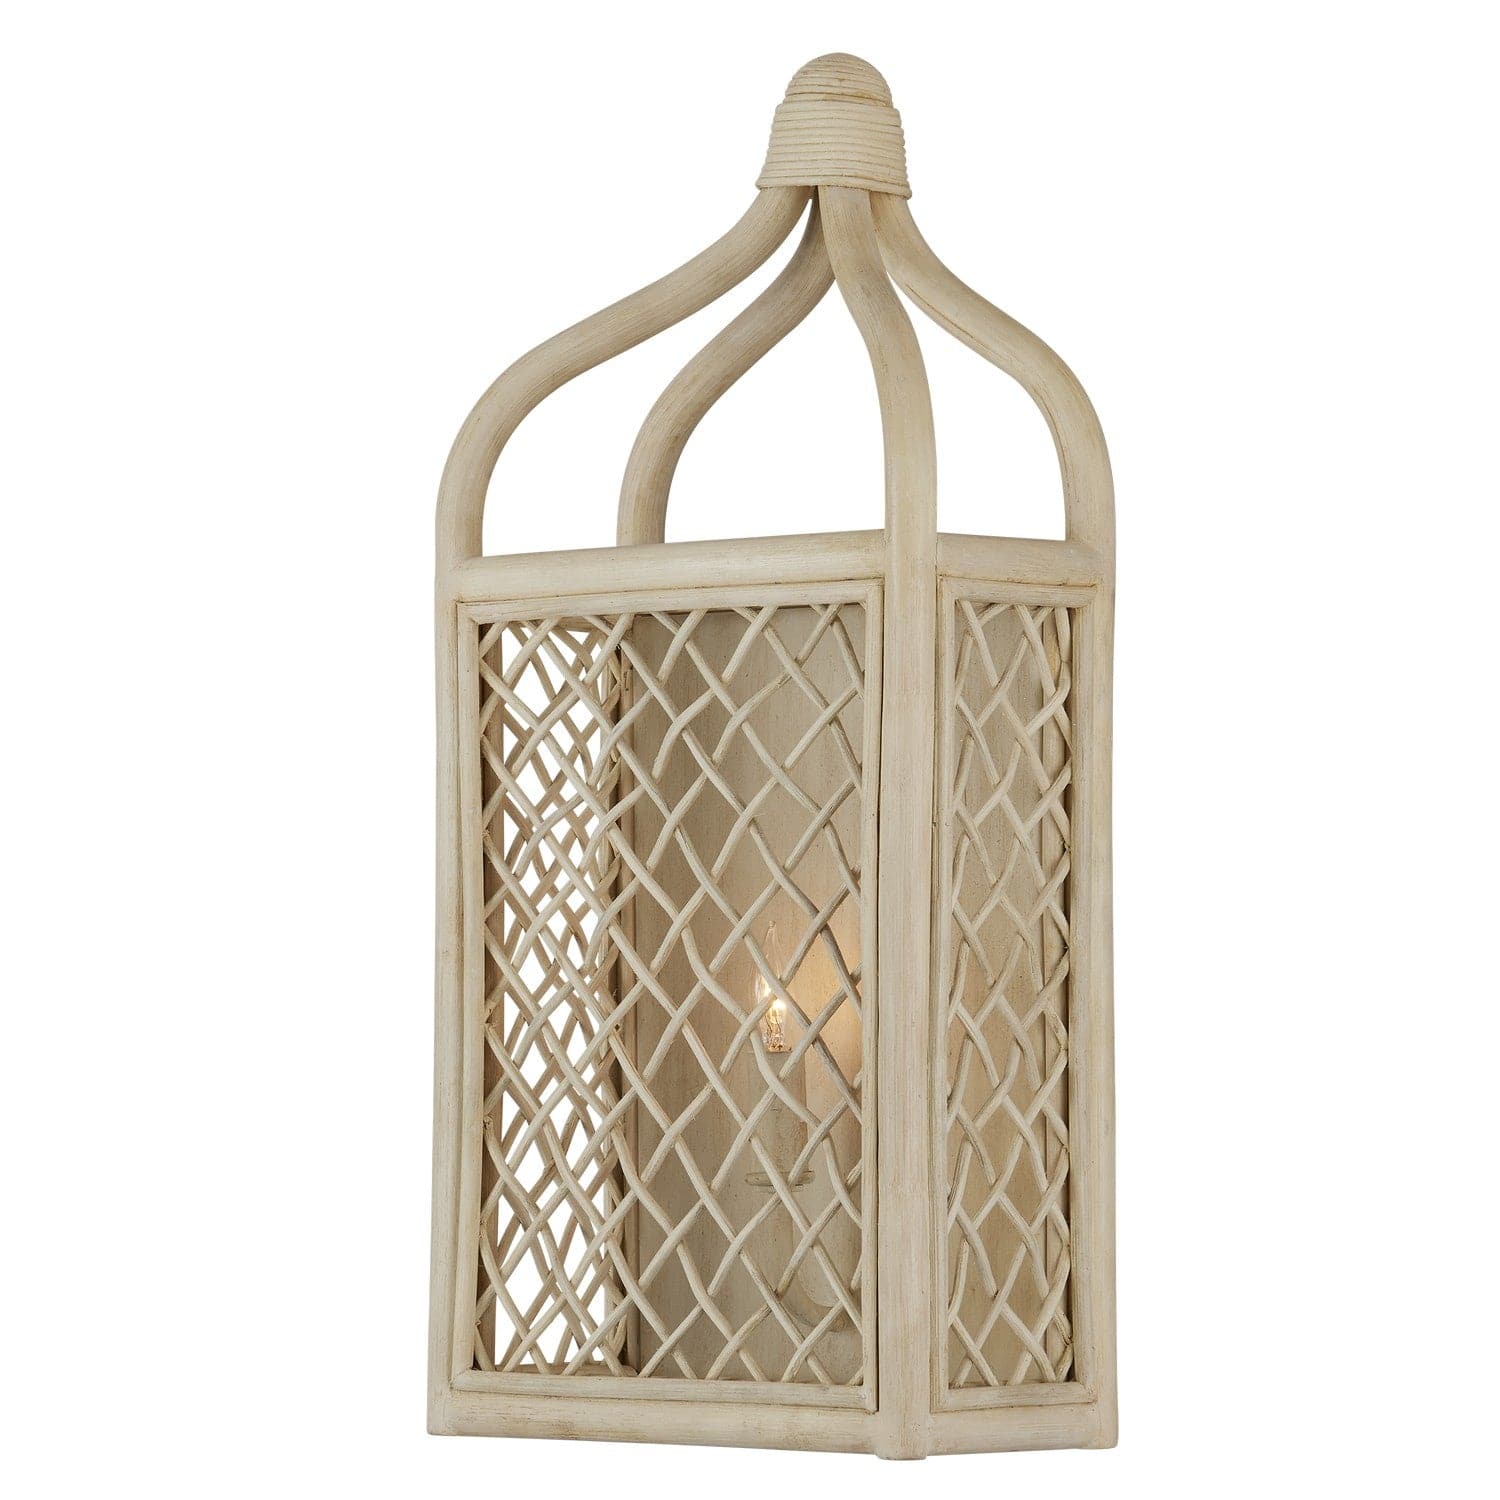 Currey and Company - 5000-0233 - One Light Wall Sconce - Bleached Natural/Antique Pearl